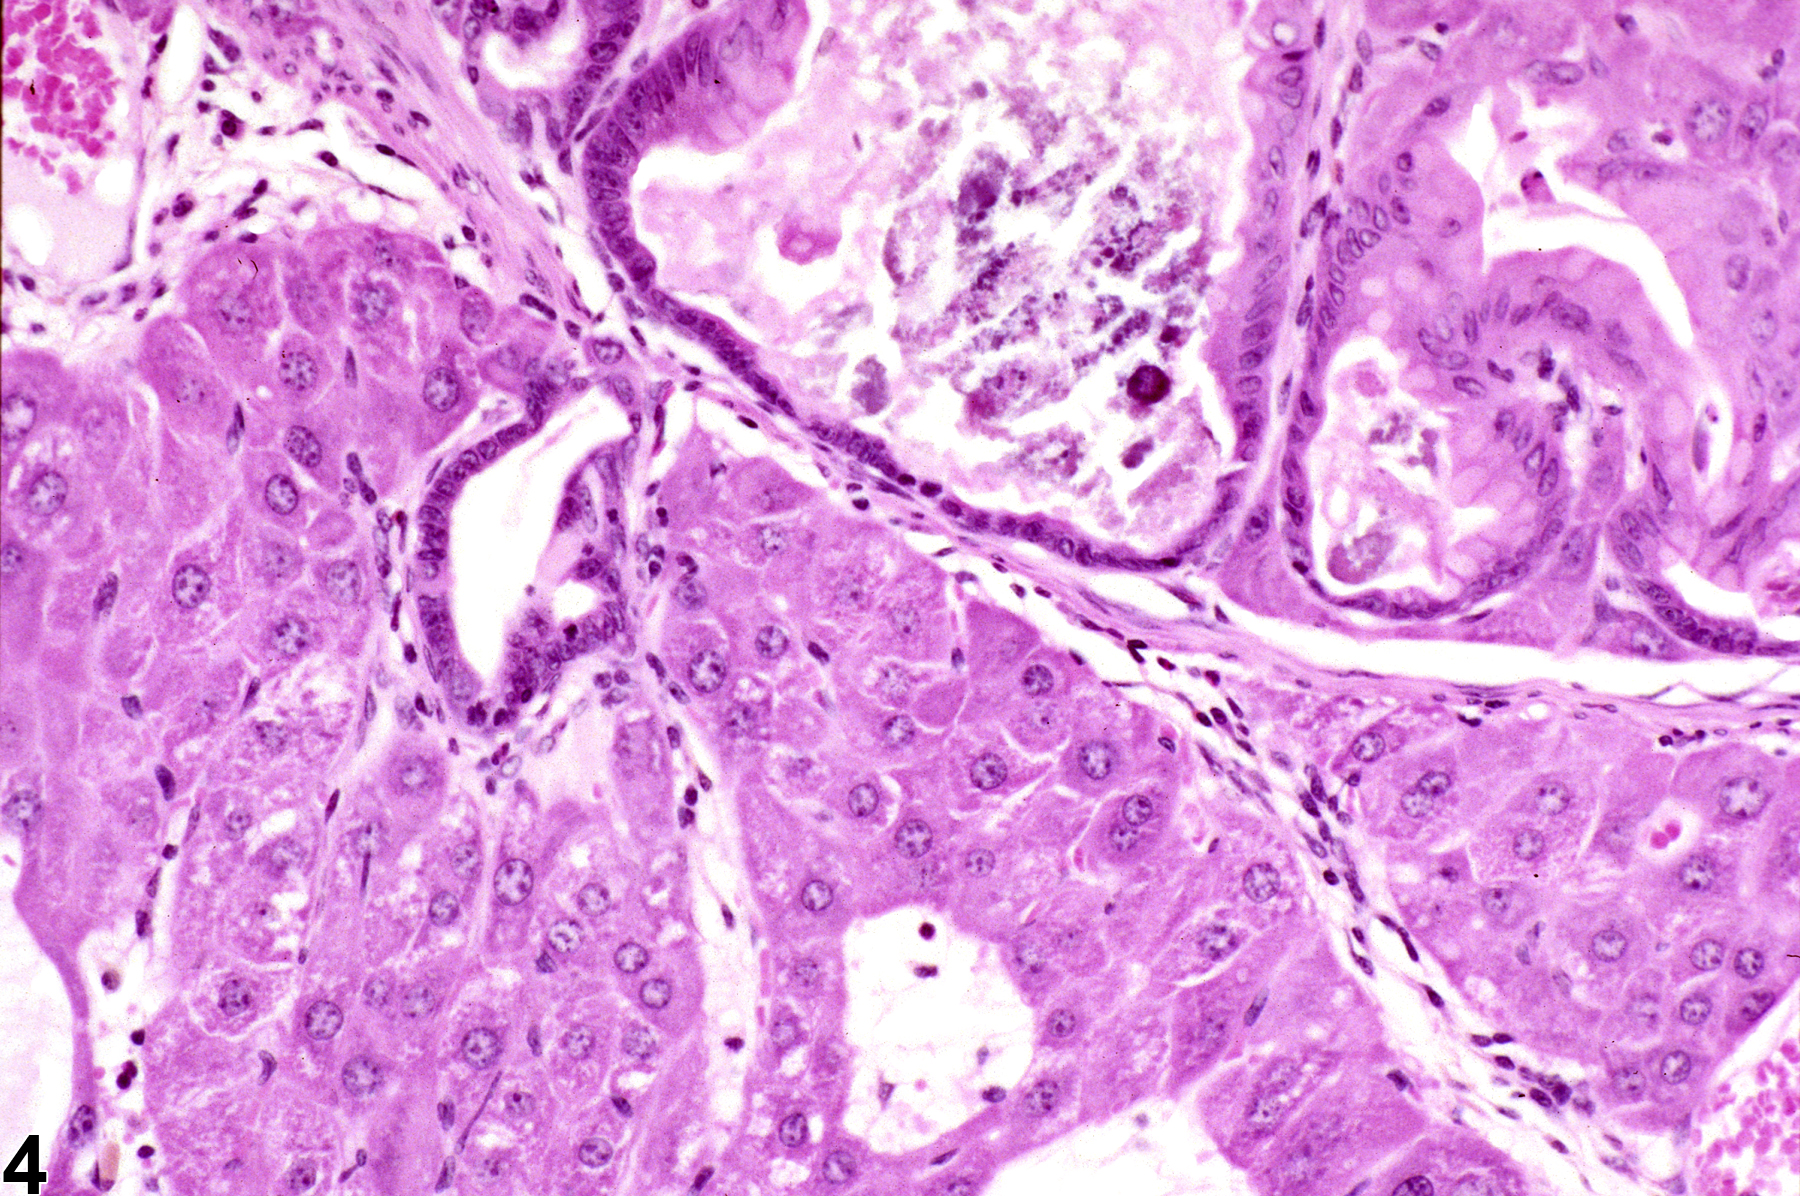 Image of ectopic tissue (liver) in the glandular stomach from a female B6C3F1 mouse in a chronic study